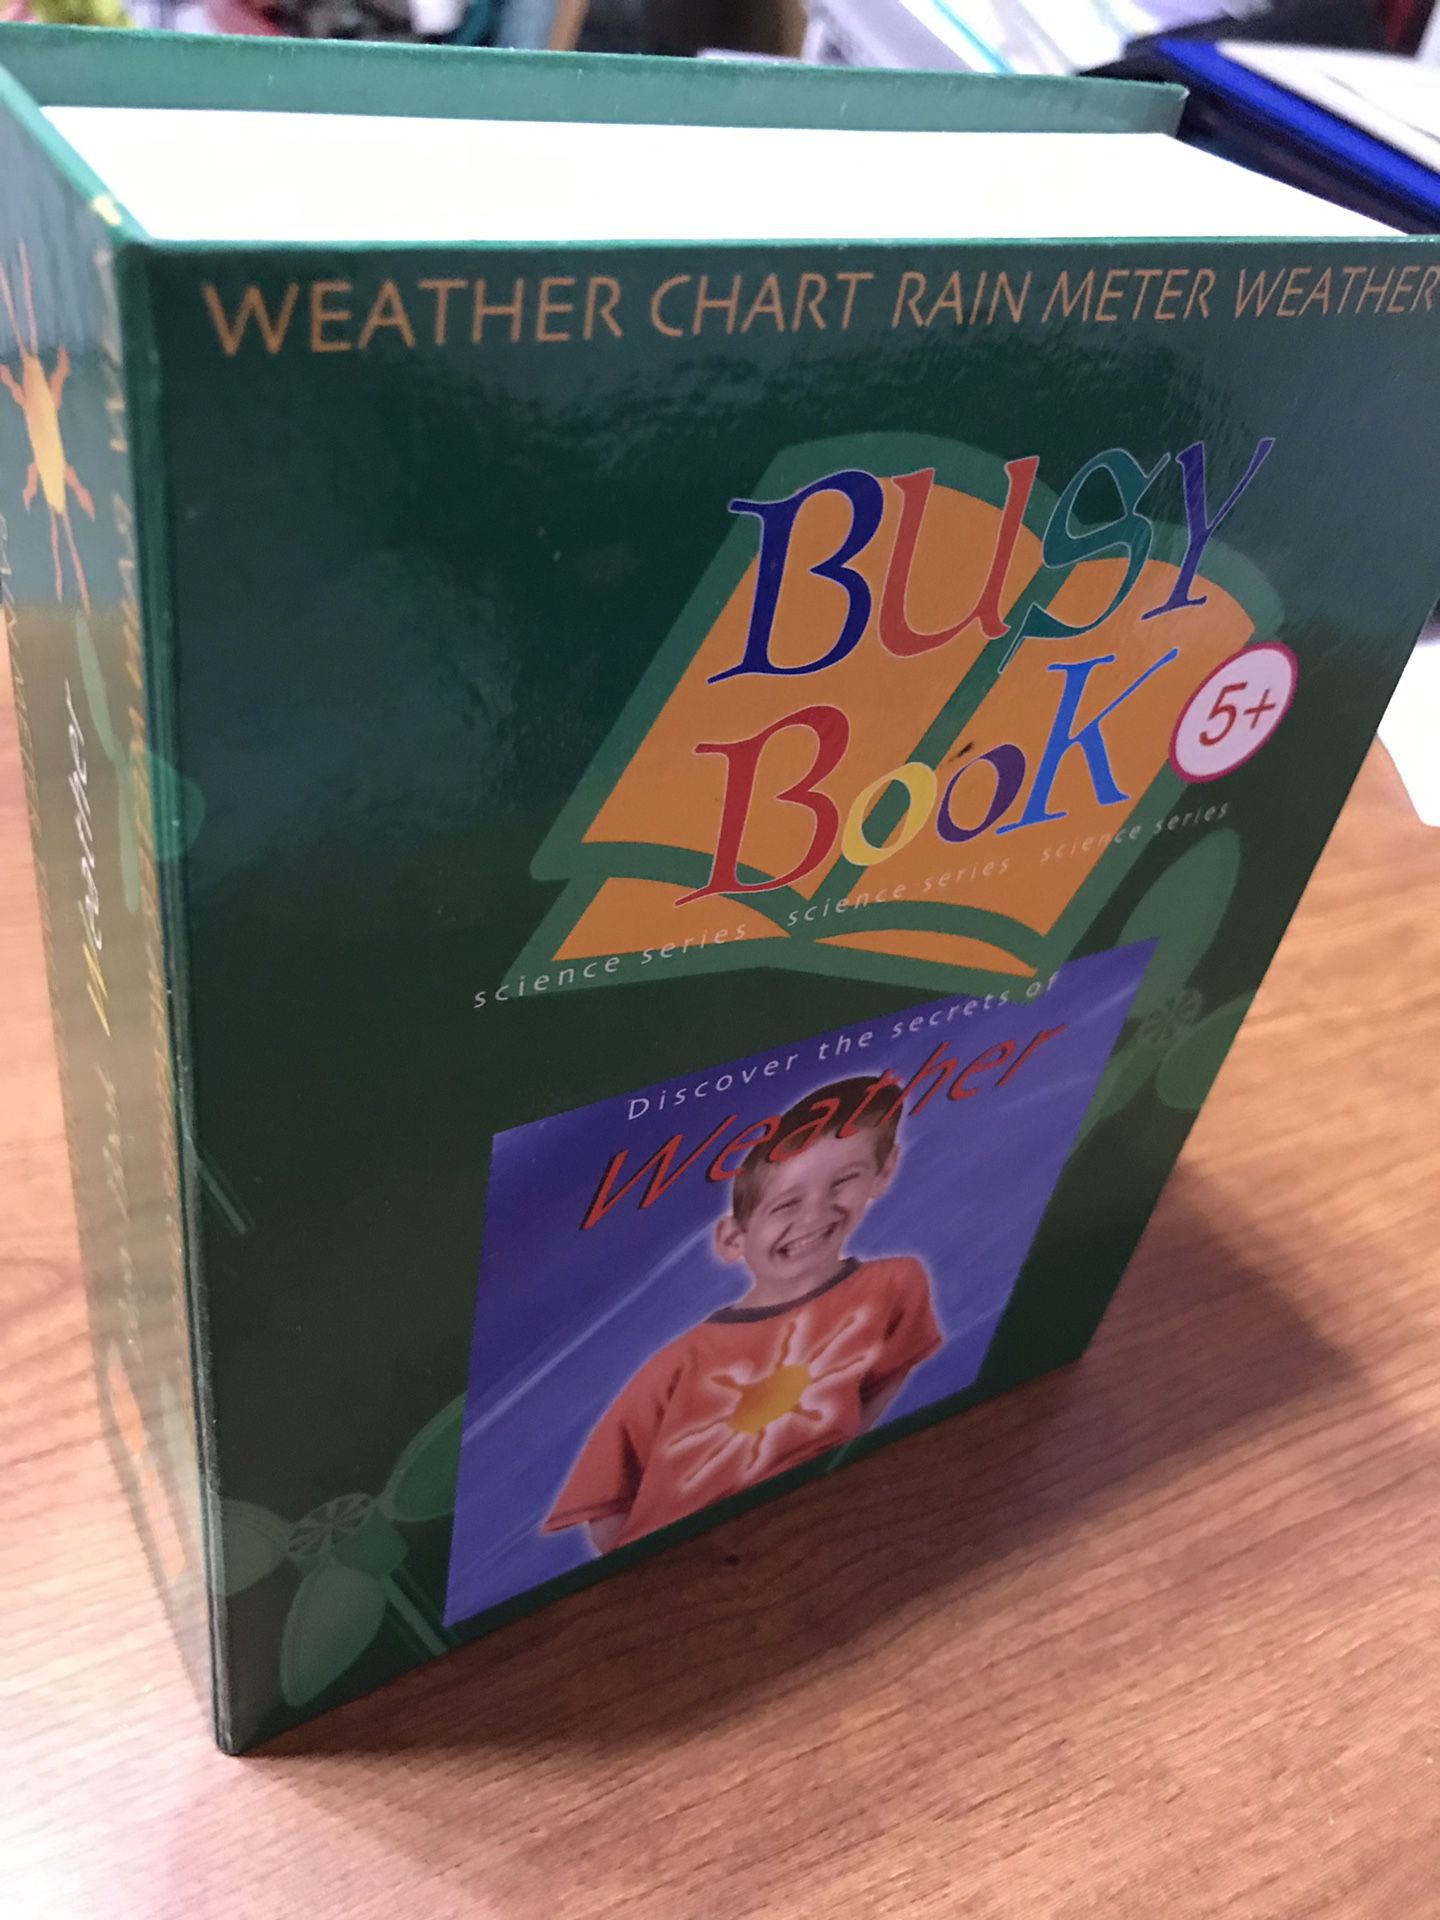 The Weather kit for children kids. Toys and games